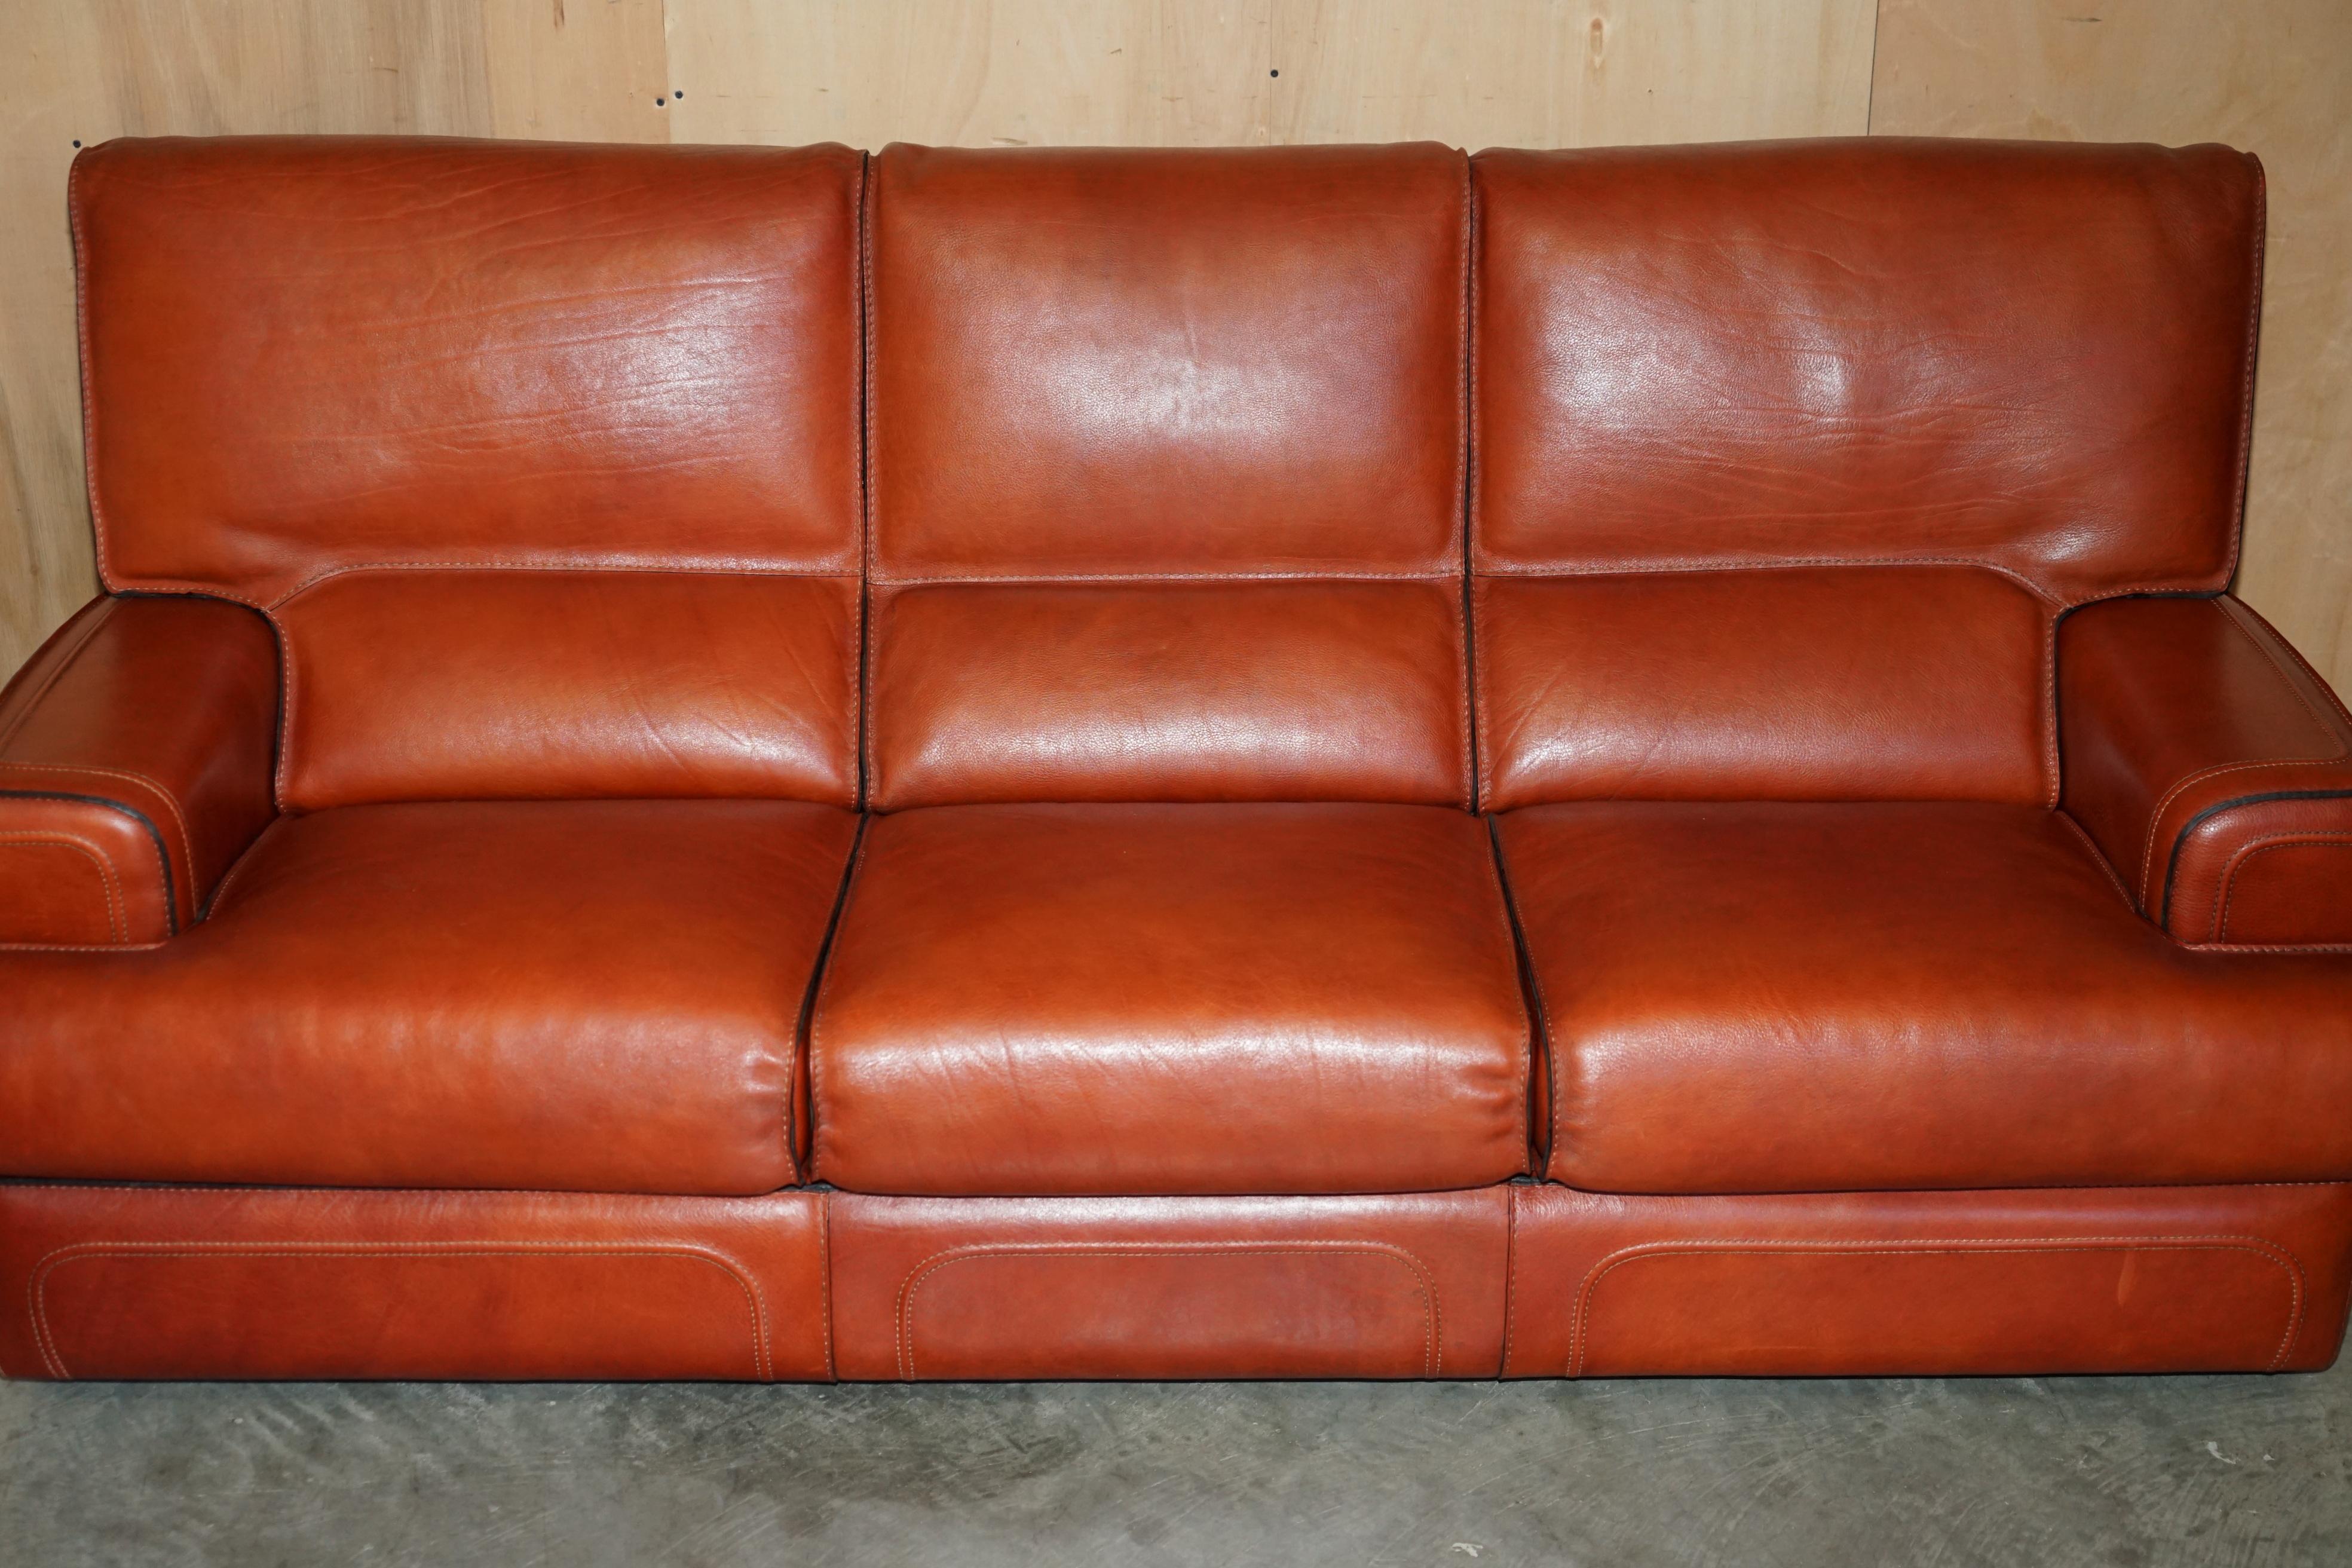 Hand-Crafted PERFECT CONDITION CIRCA 1970's ROCHE BOBOIS BROWN LEATHER SOFA ARMCHAIR SUITE